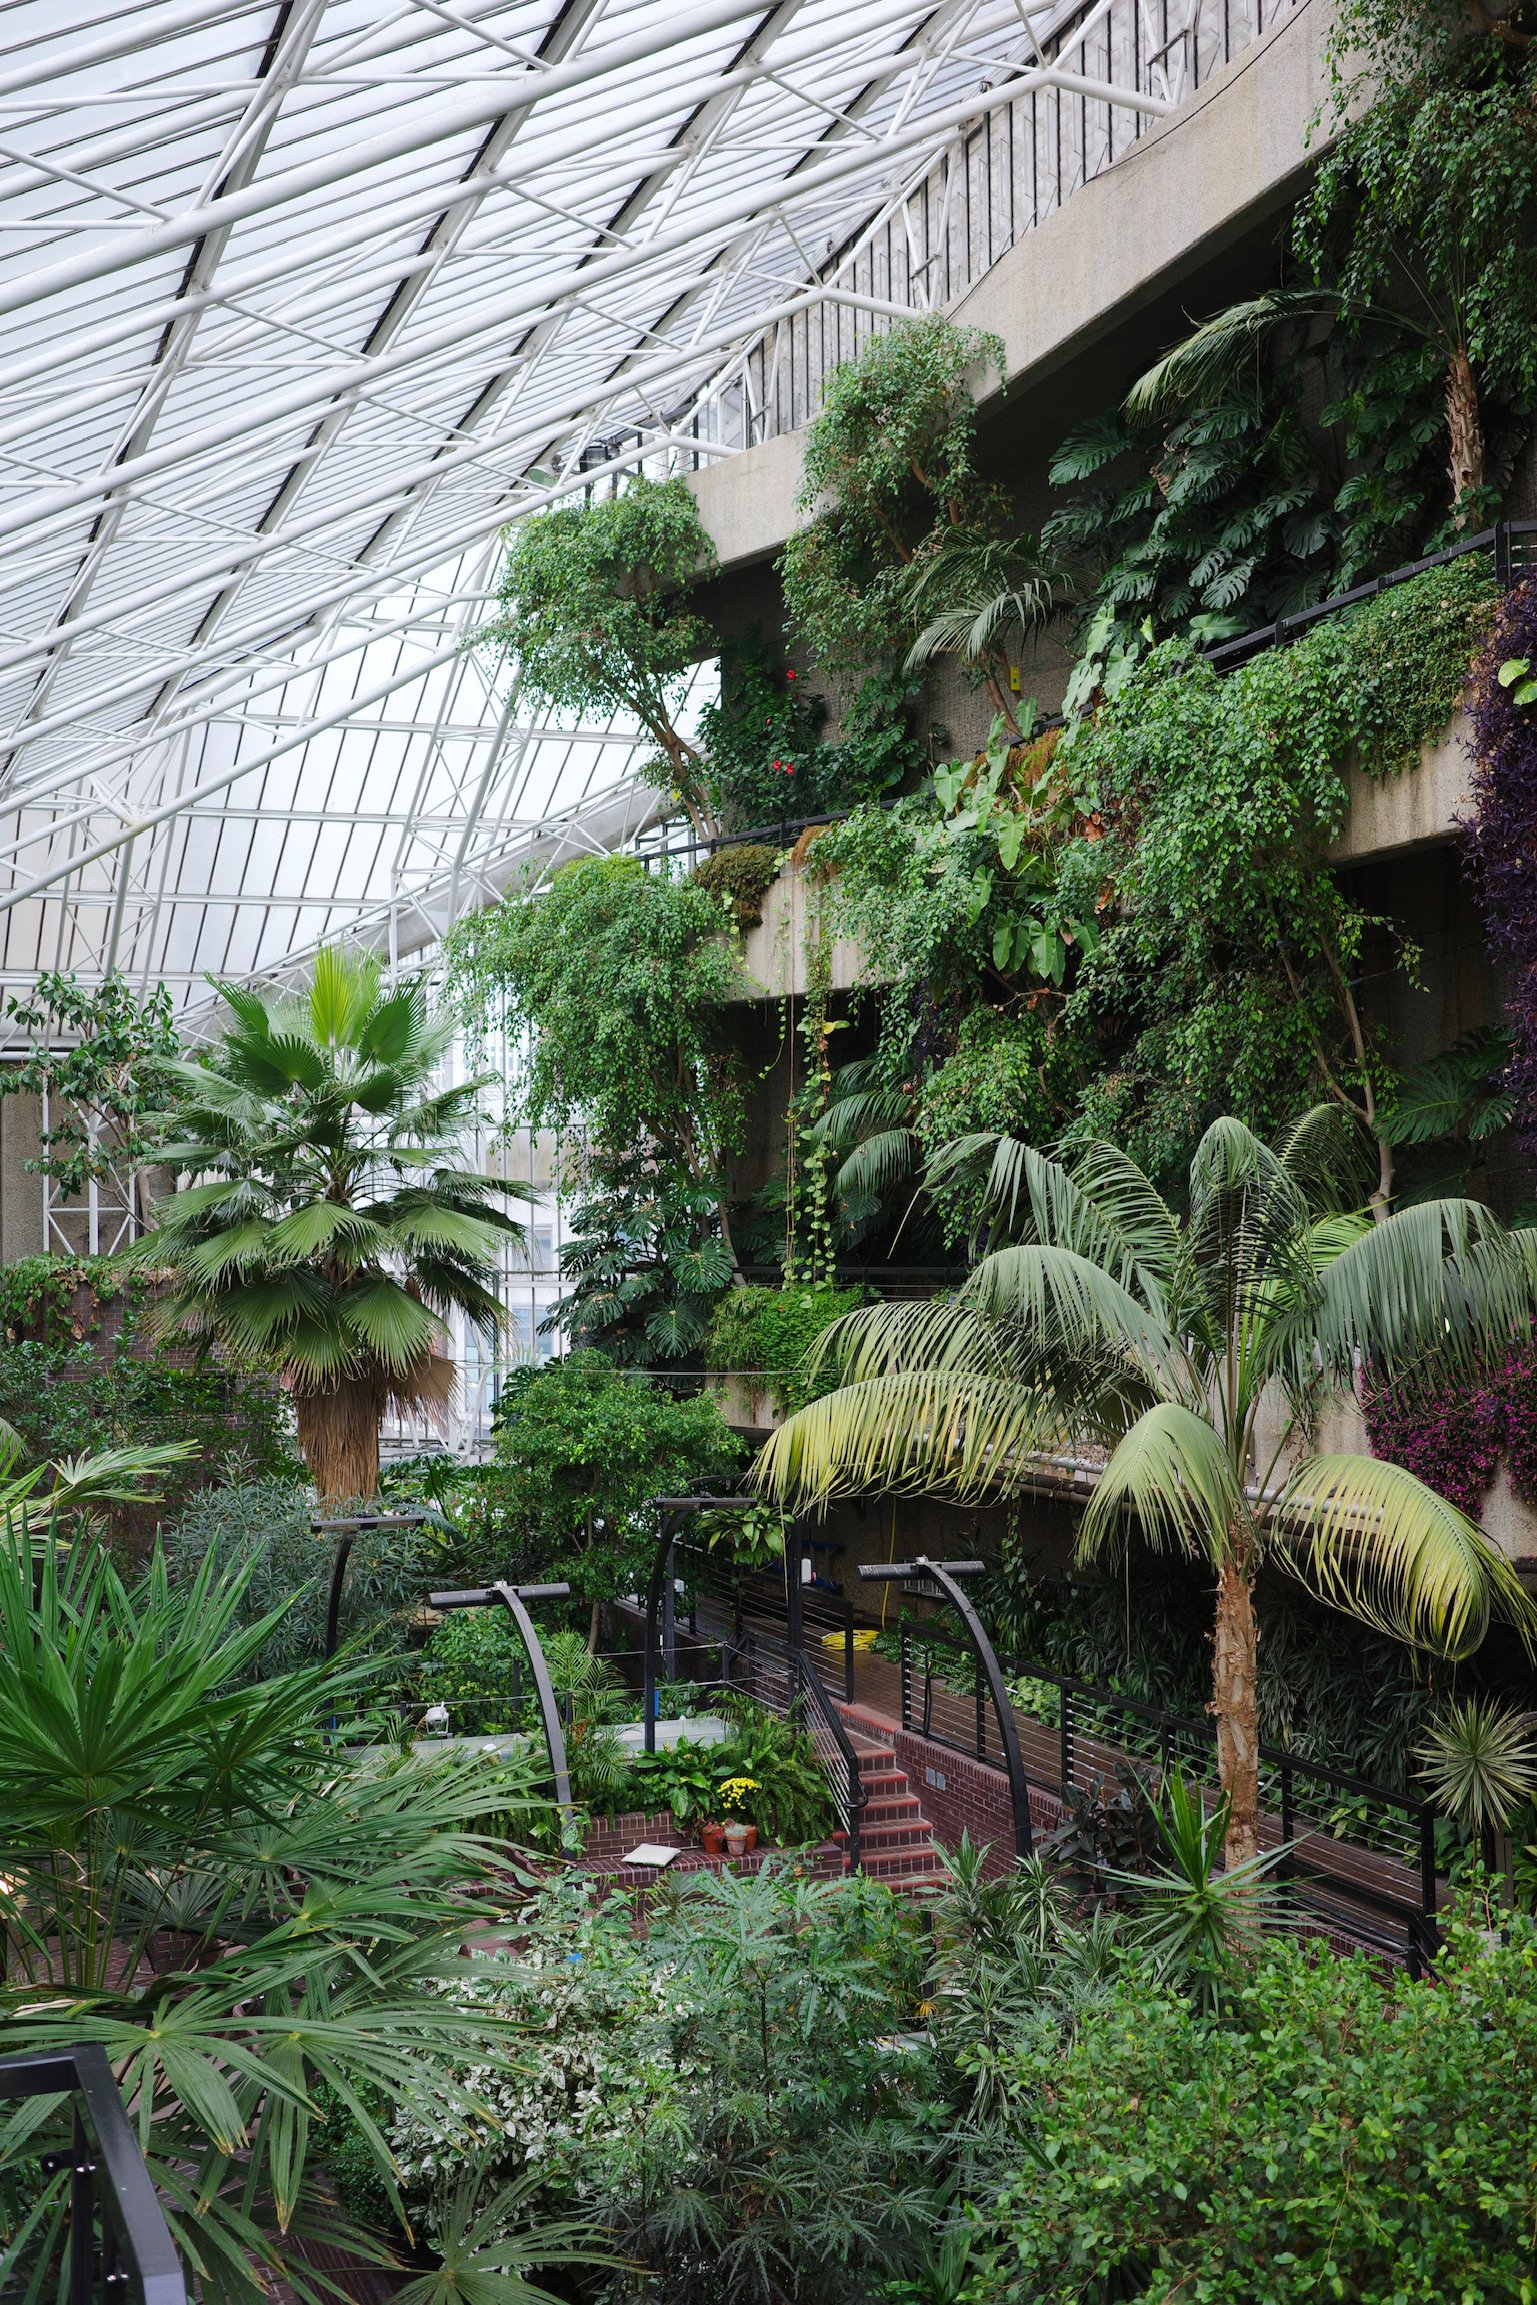 A conservatory with tropical plants spanning across 4 stories.